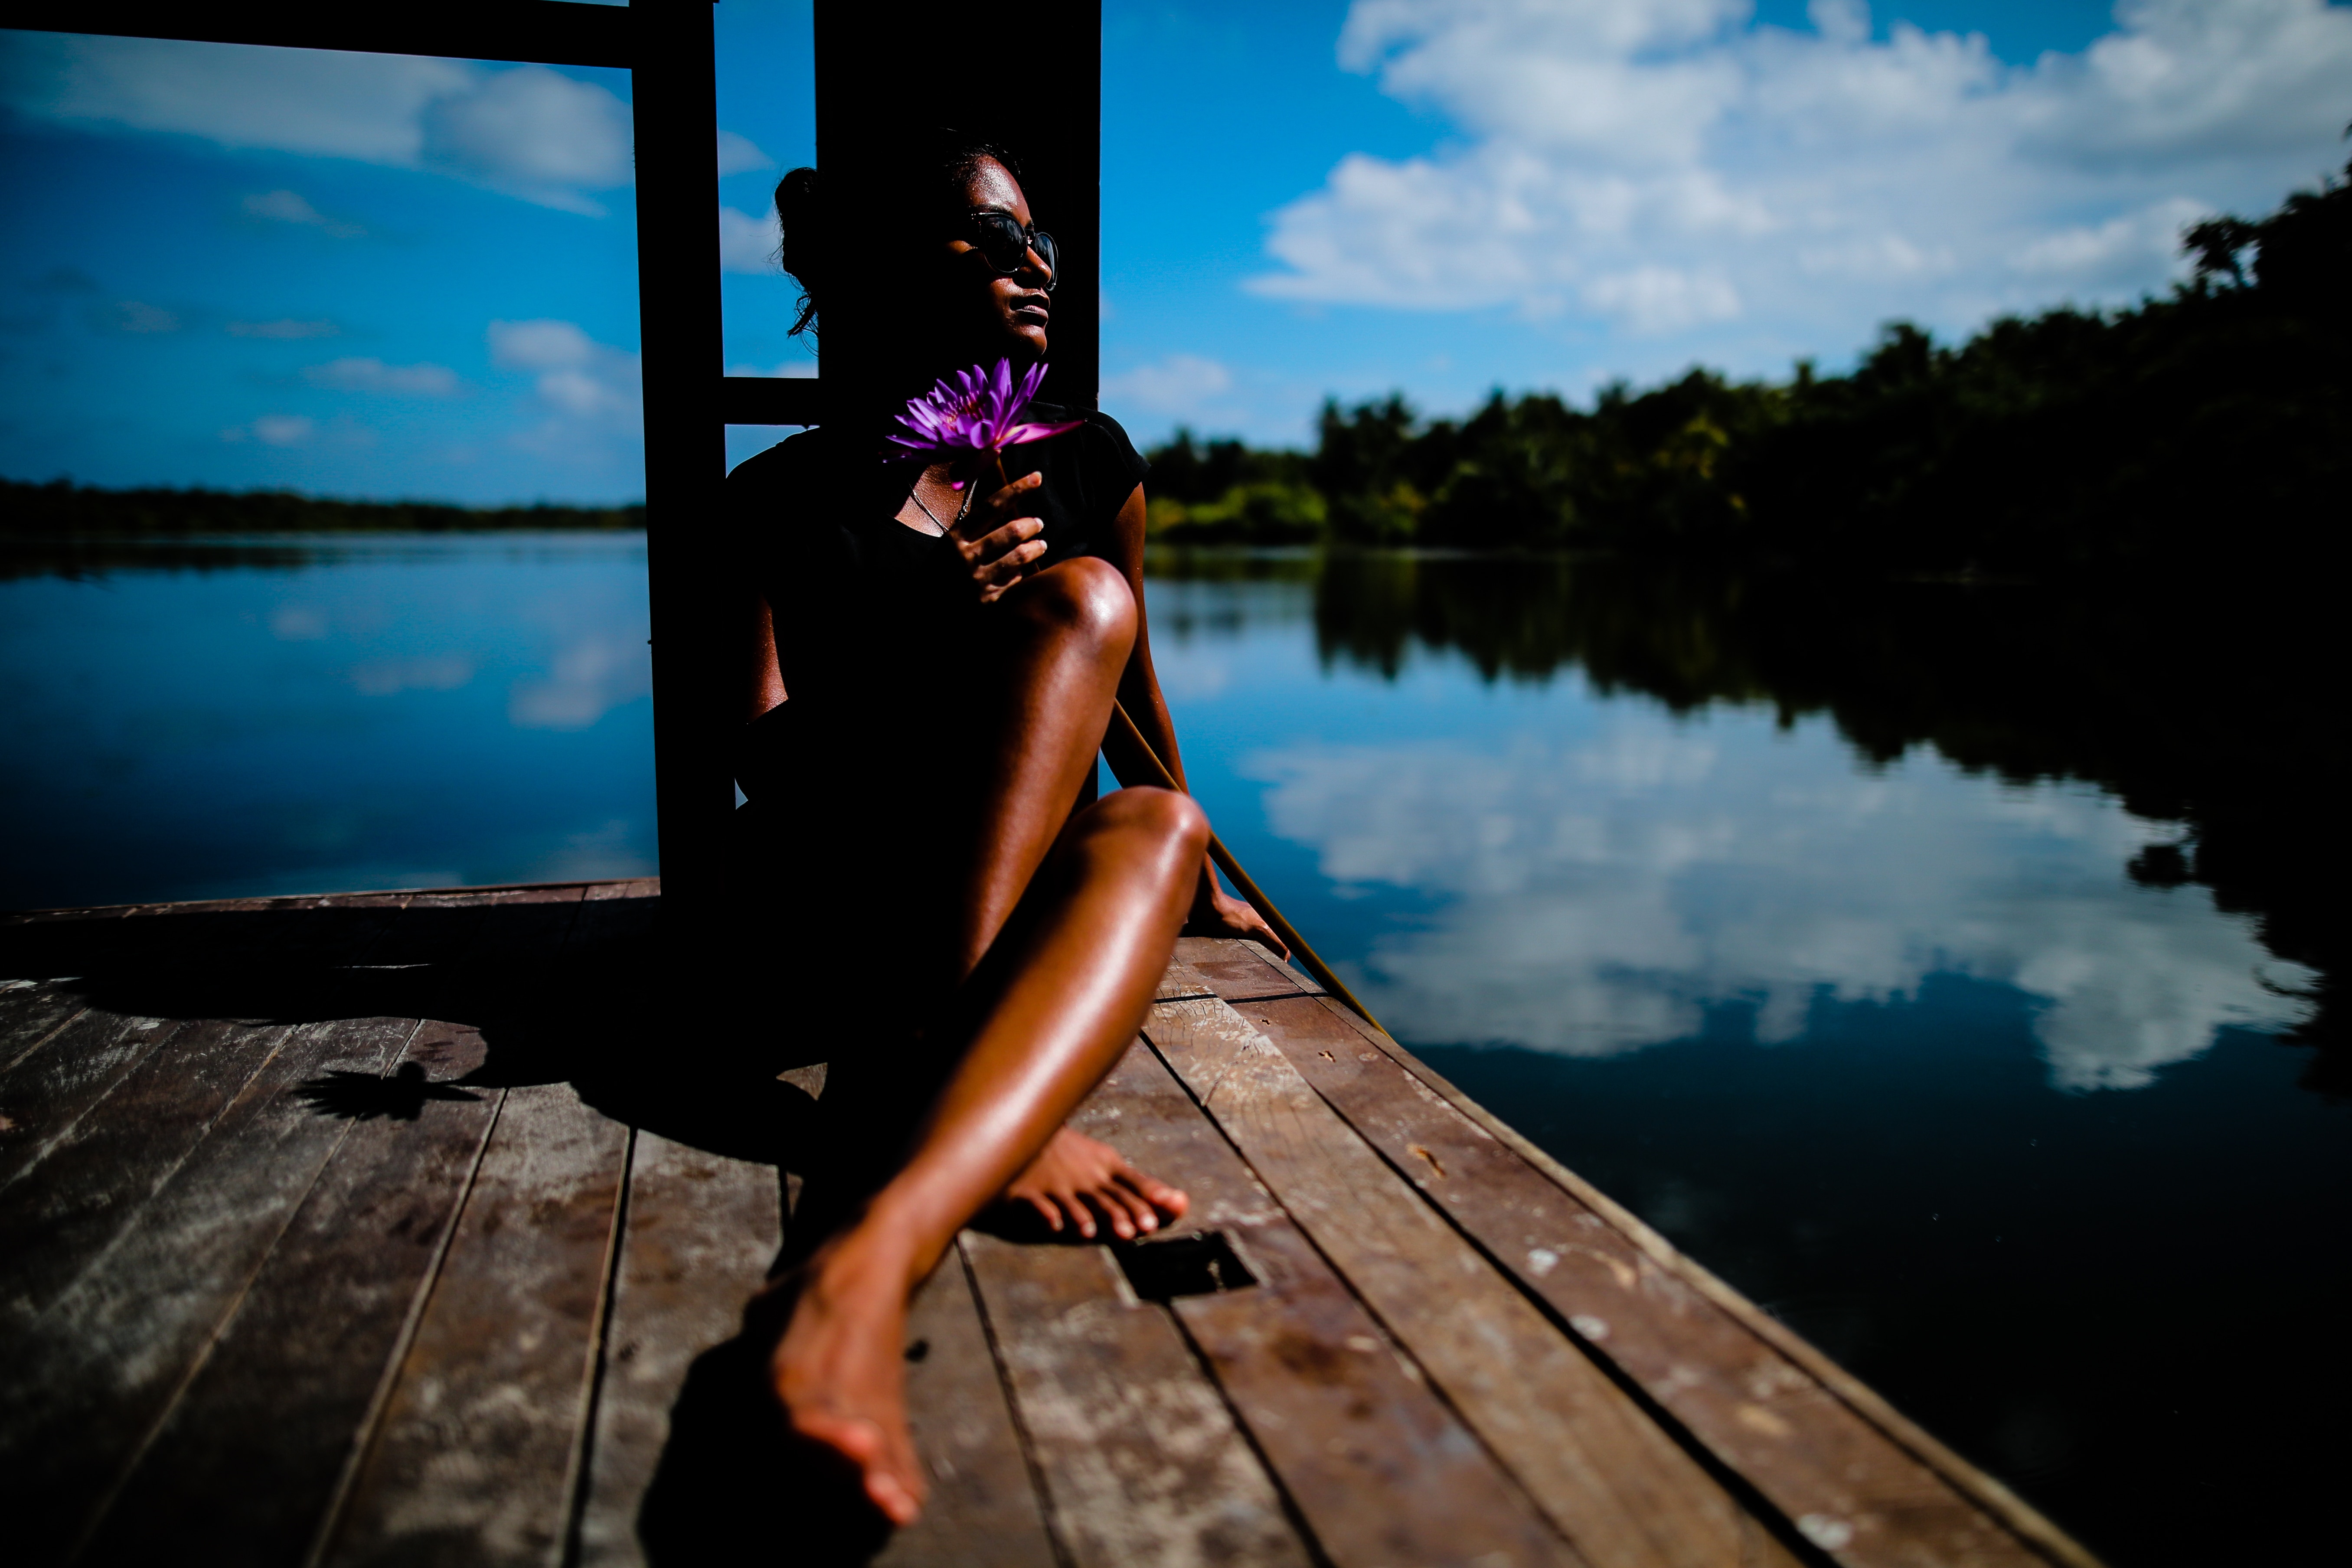 woman wearing sunglasses sitting on brown wooden parquet floor beside body of water during daytime